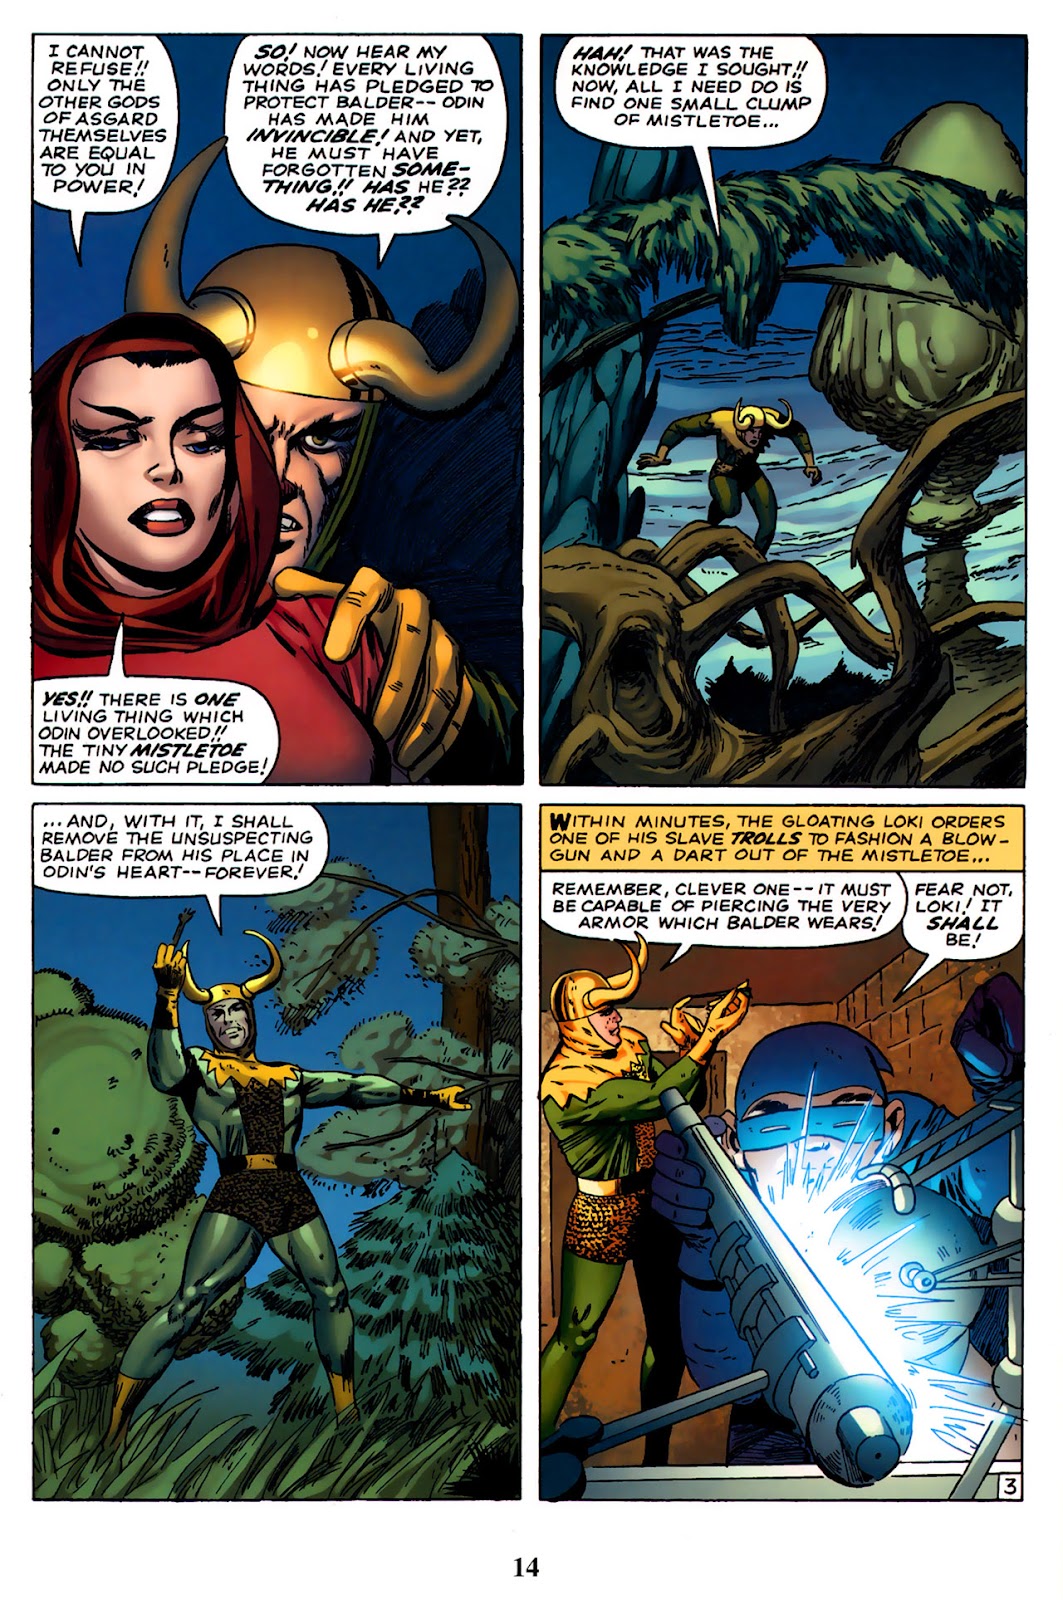 Thor: Tales of Asgard by Stan Lee & Jack Kirby issue 2 - Page 16